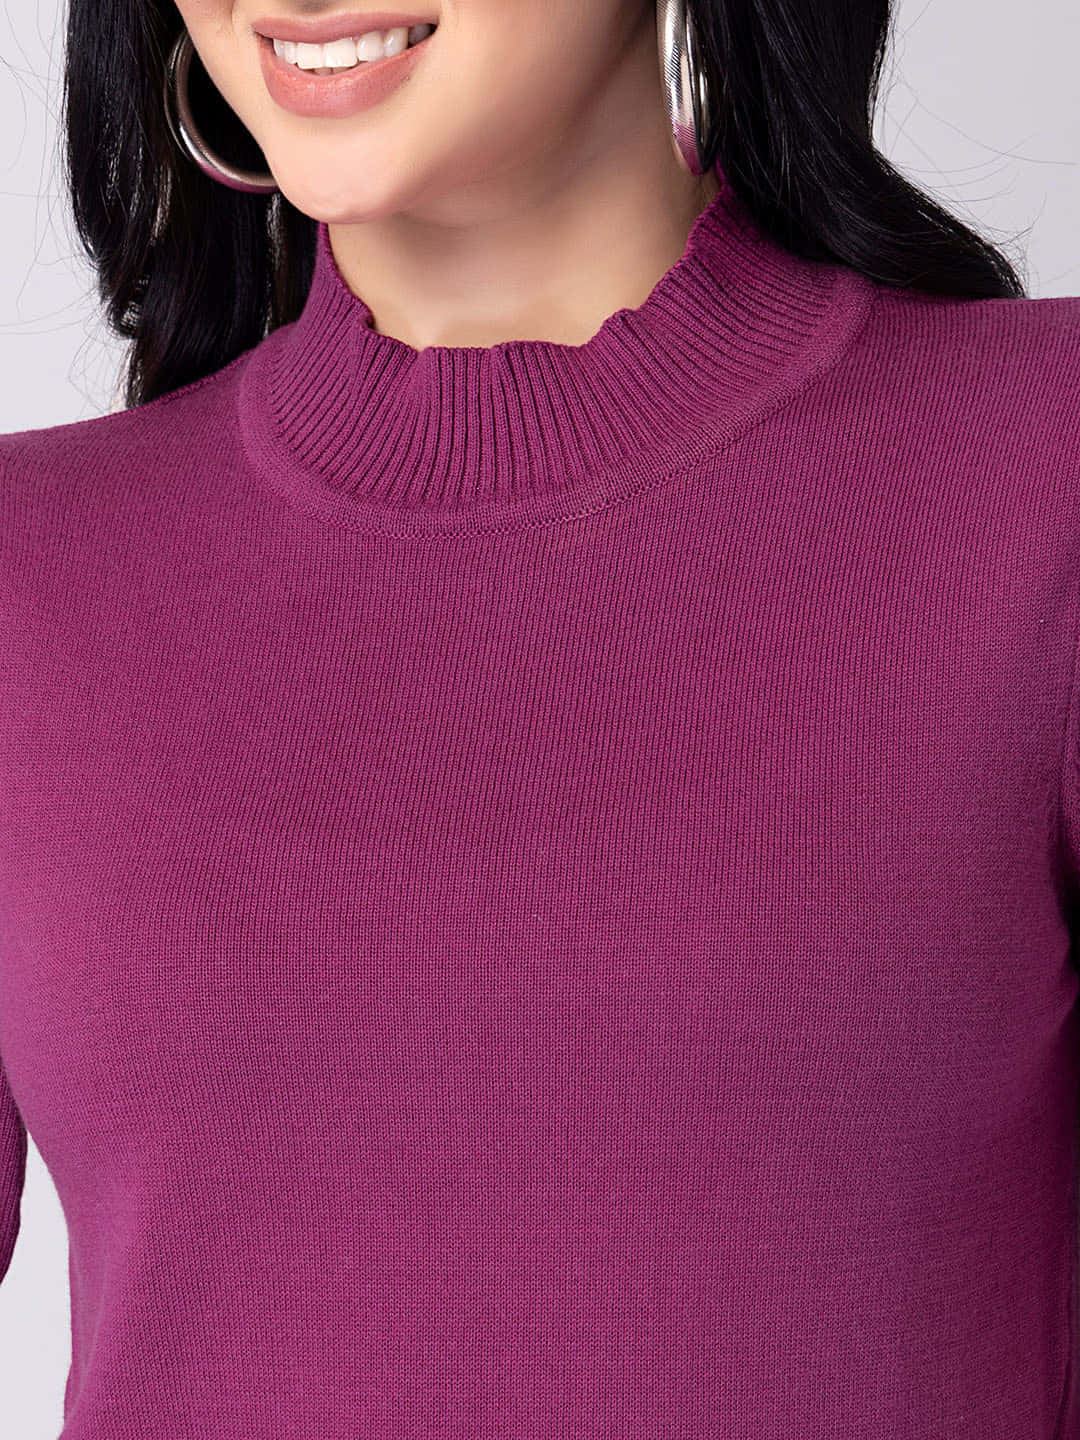 Feel confident and stylish in a chic purple turtle-neck sweater! Wallpaper